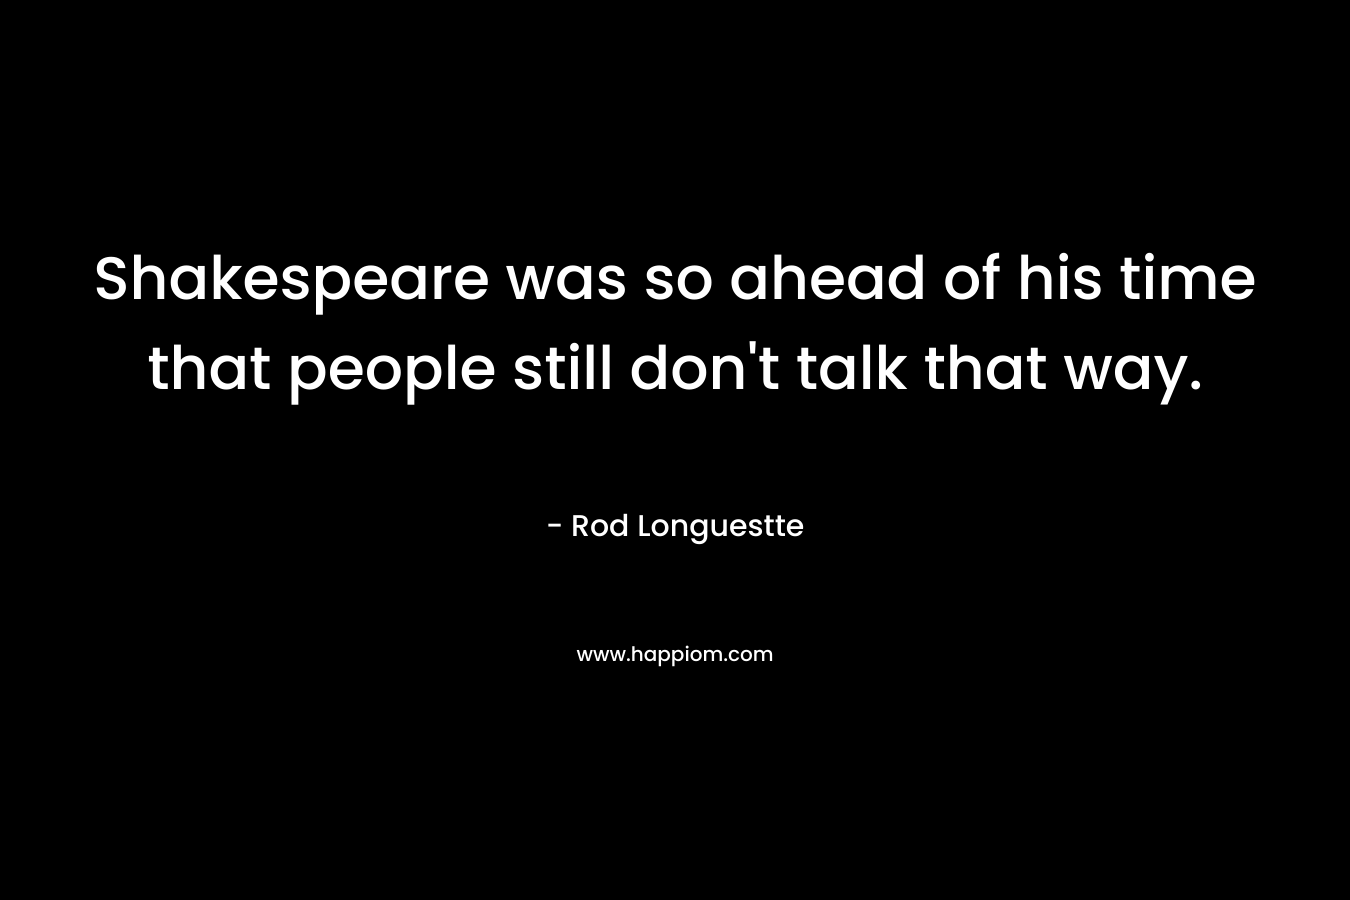 Shakespeare was so ahead of his time that people still don't talk that way.